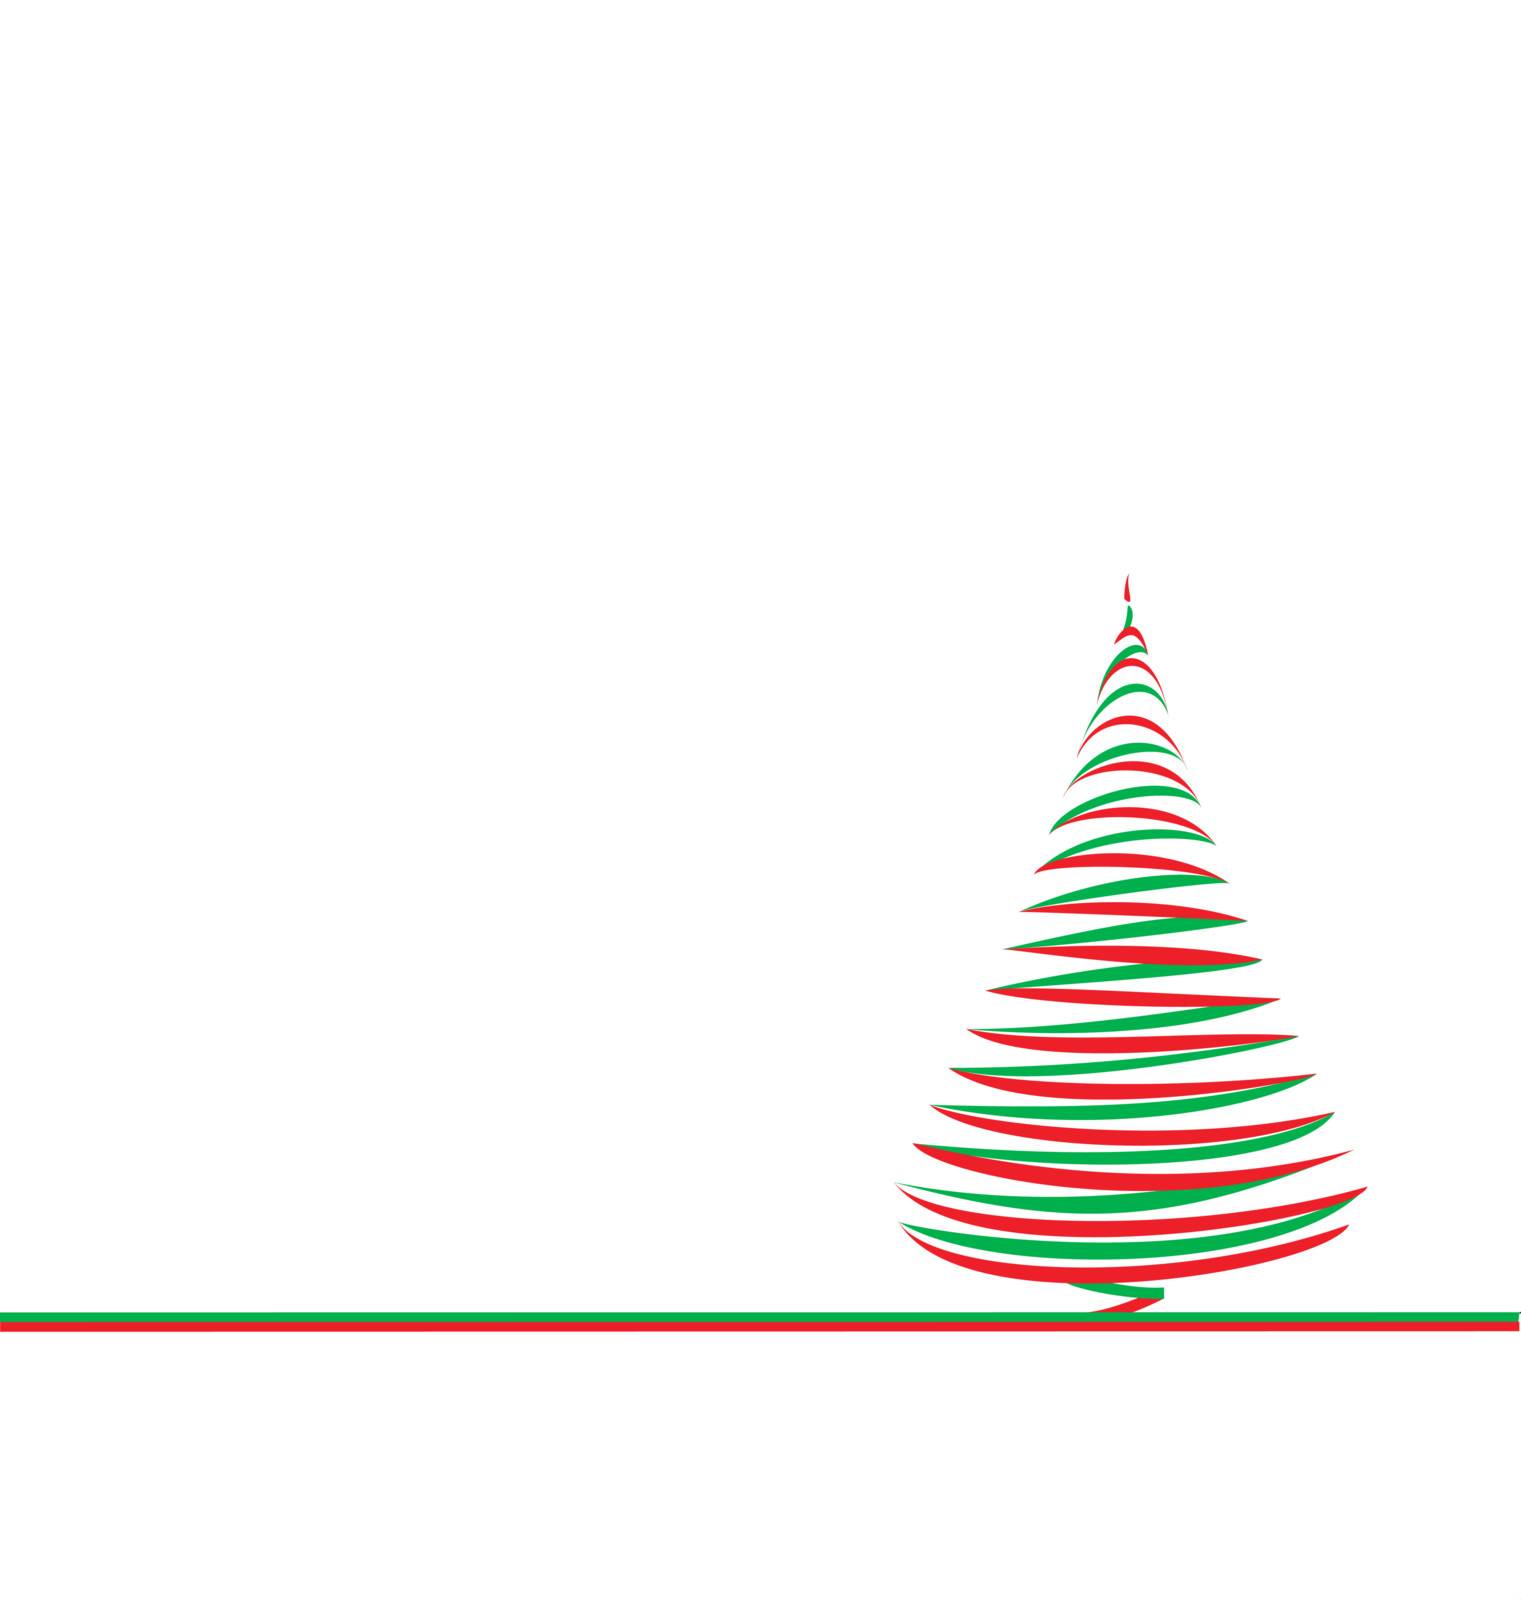 Abstract christmas tree in green and red lines